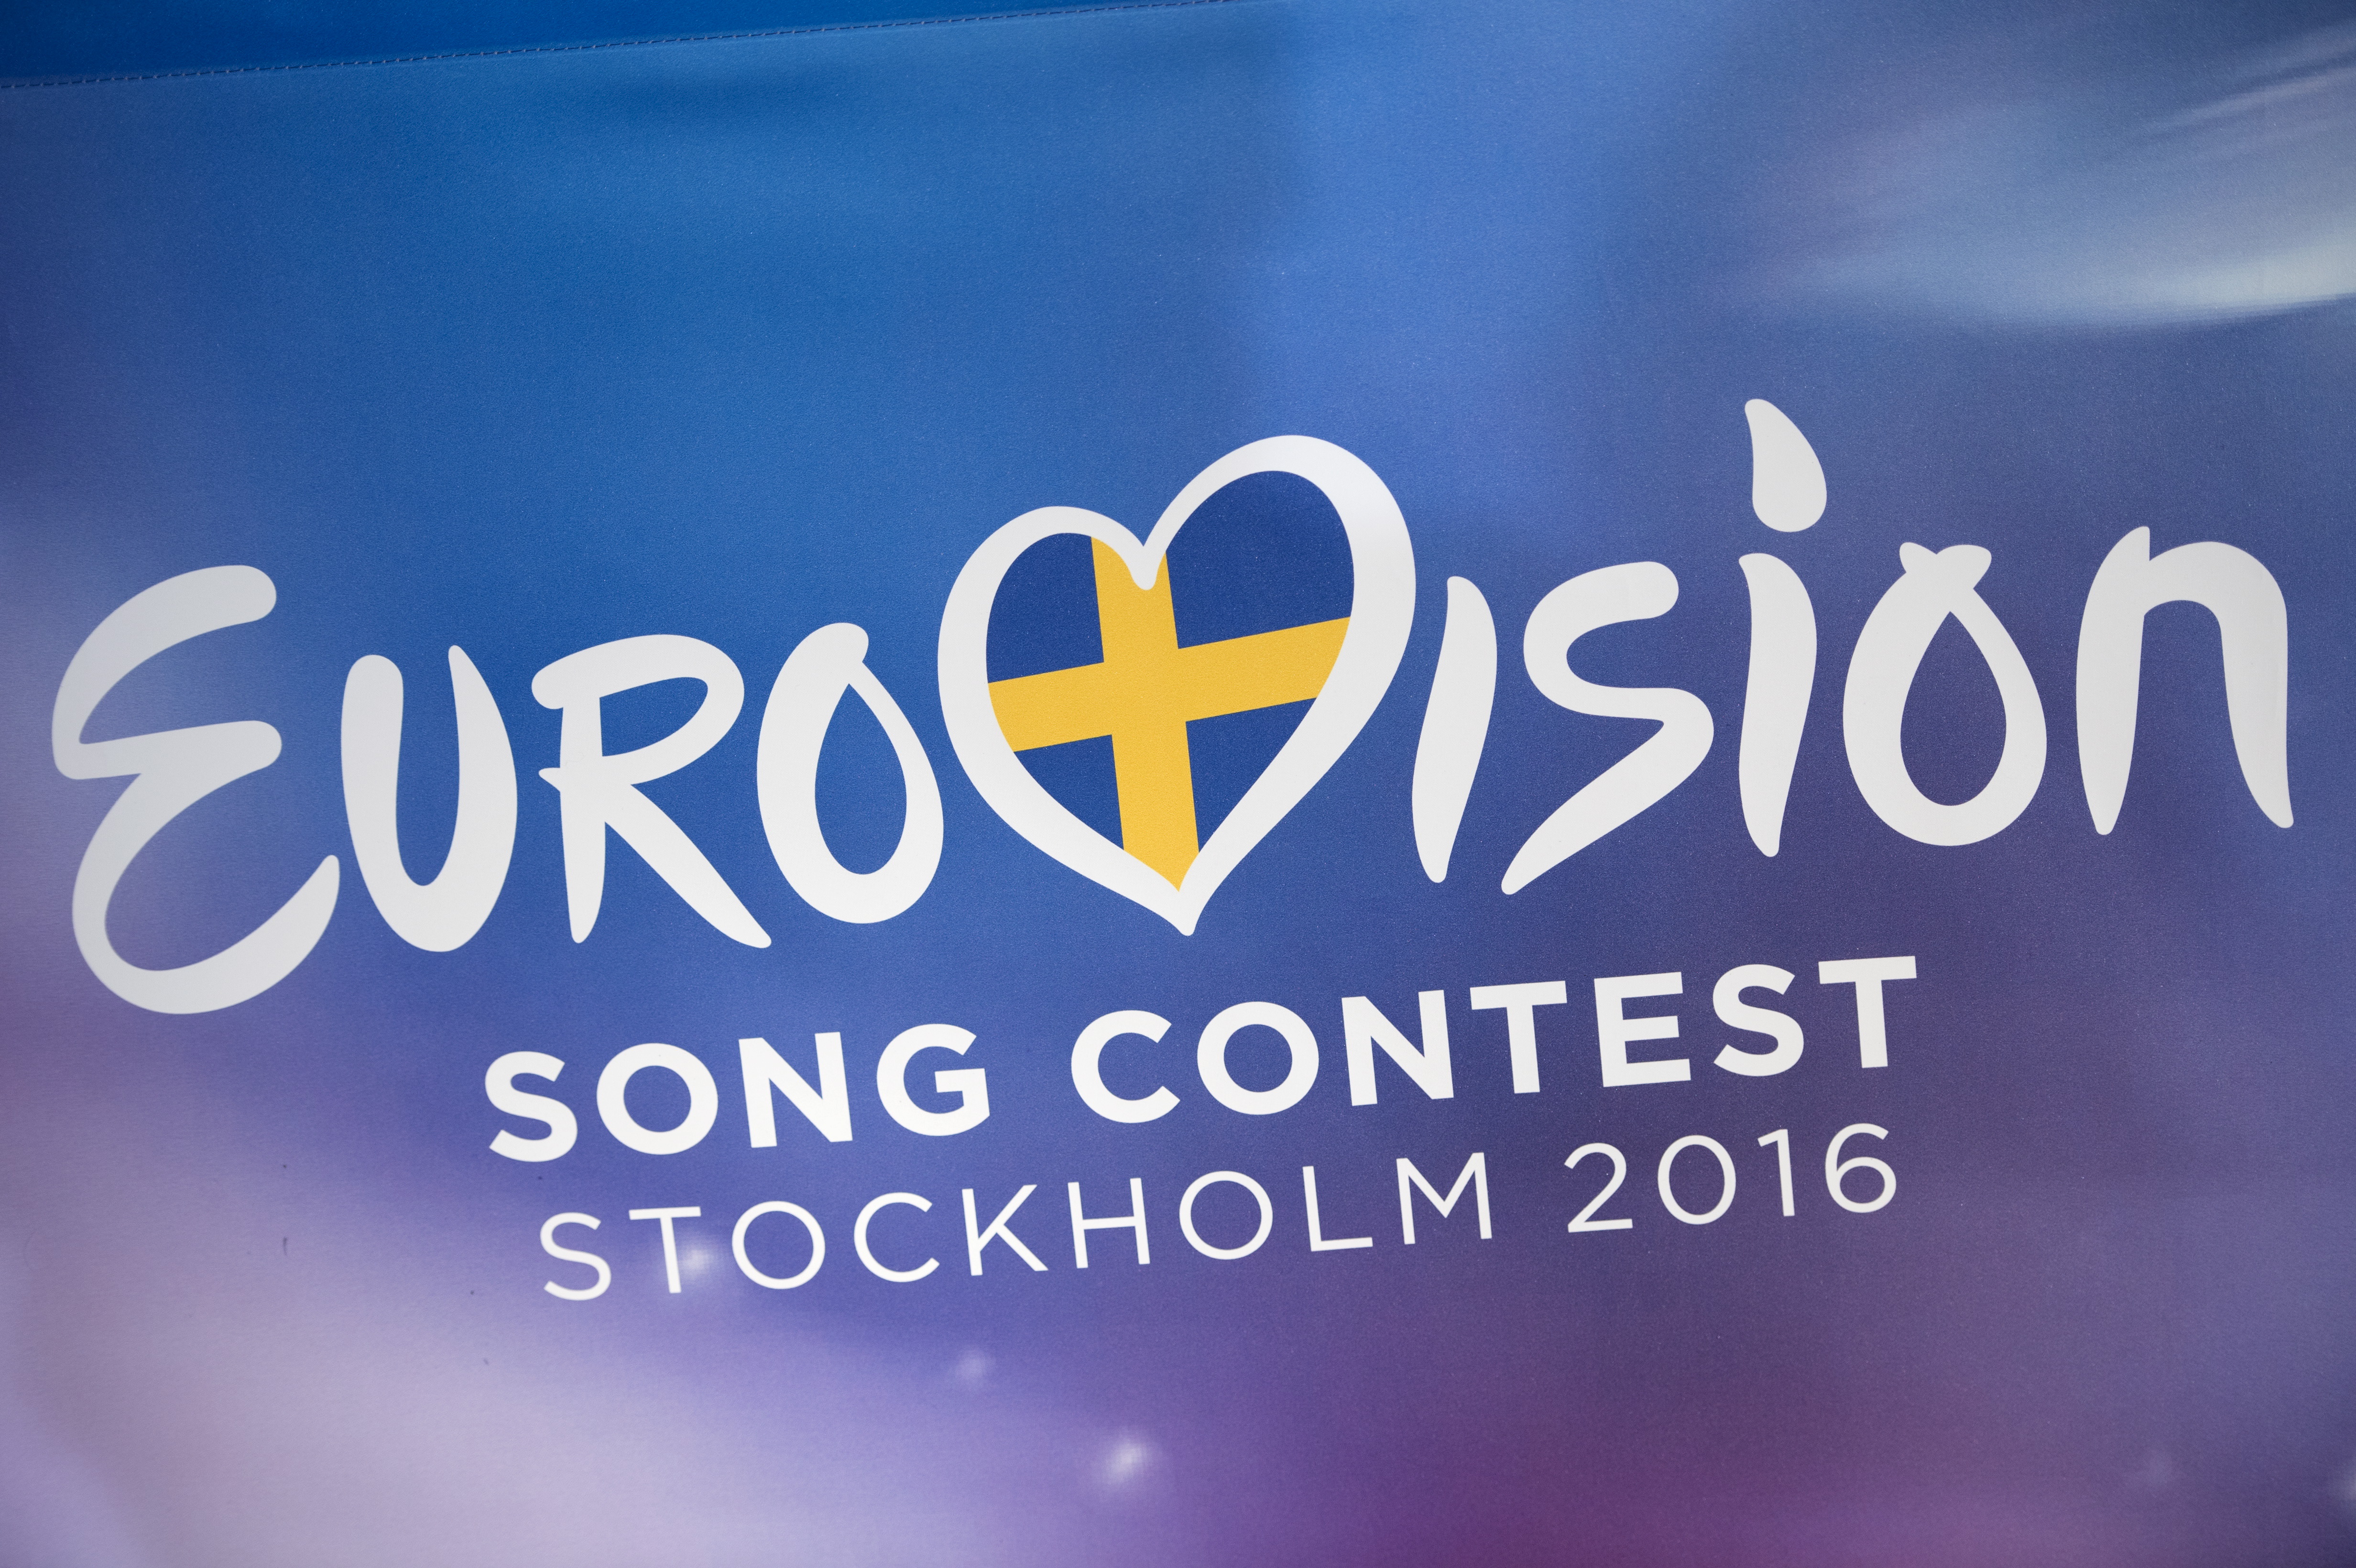 The logo of the Eurovison Song Contest 2106 is seen during the draw for the semi-finals of Eurovision Song Contest at Stockholm City Hall, Sweden, January 25, 2016. REUTERS/Henrik Montgomer/TT News Agency ATTENTION EDITORS - THIS IMAGE WAS PROVIDED BY A THIRD PARTY. FOR EDITORIAL USE ONLY. NOT FOR SALE FOR MARKETING OR ADVERTISING CAMPAIGNS. THIS PICTURE IS DISTRIBUTED EXACTLY AS RECEIVED BY REUTERS, AS A SERVICE TO CLIENTS. SWEDEN OUT. NO COMMERCIAL OR EDITORIAL SALES IN SWEDEN. NO COMMERCIAL SALES. - RTX23X7H